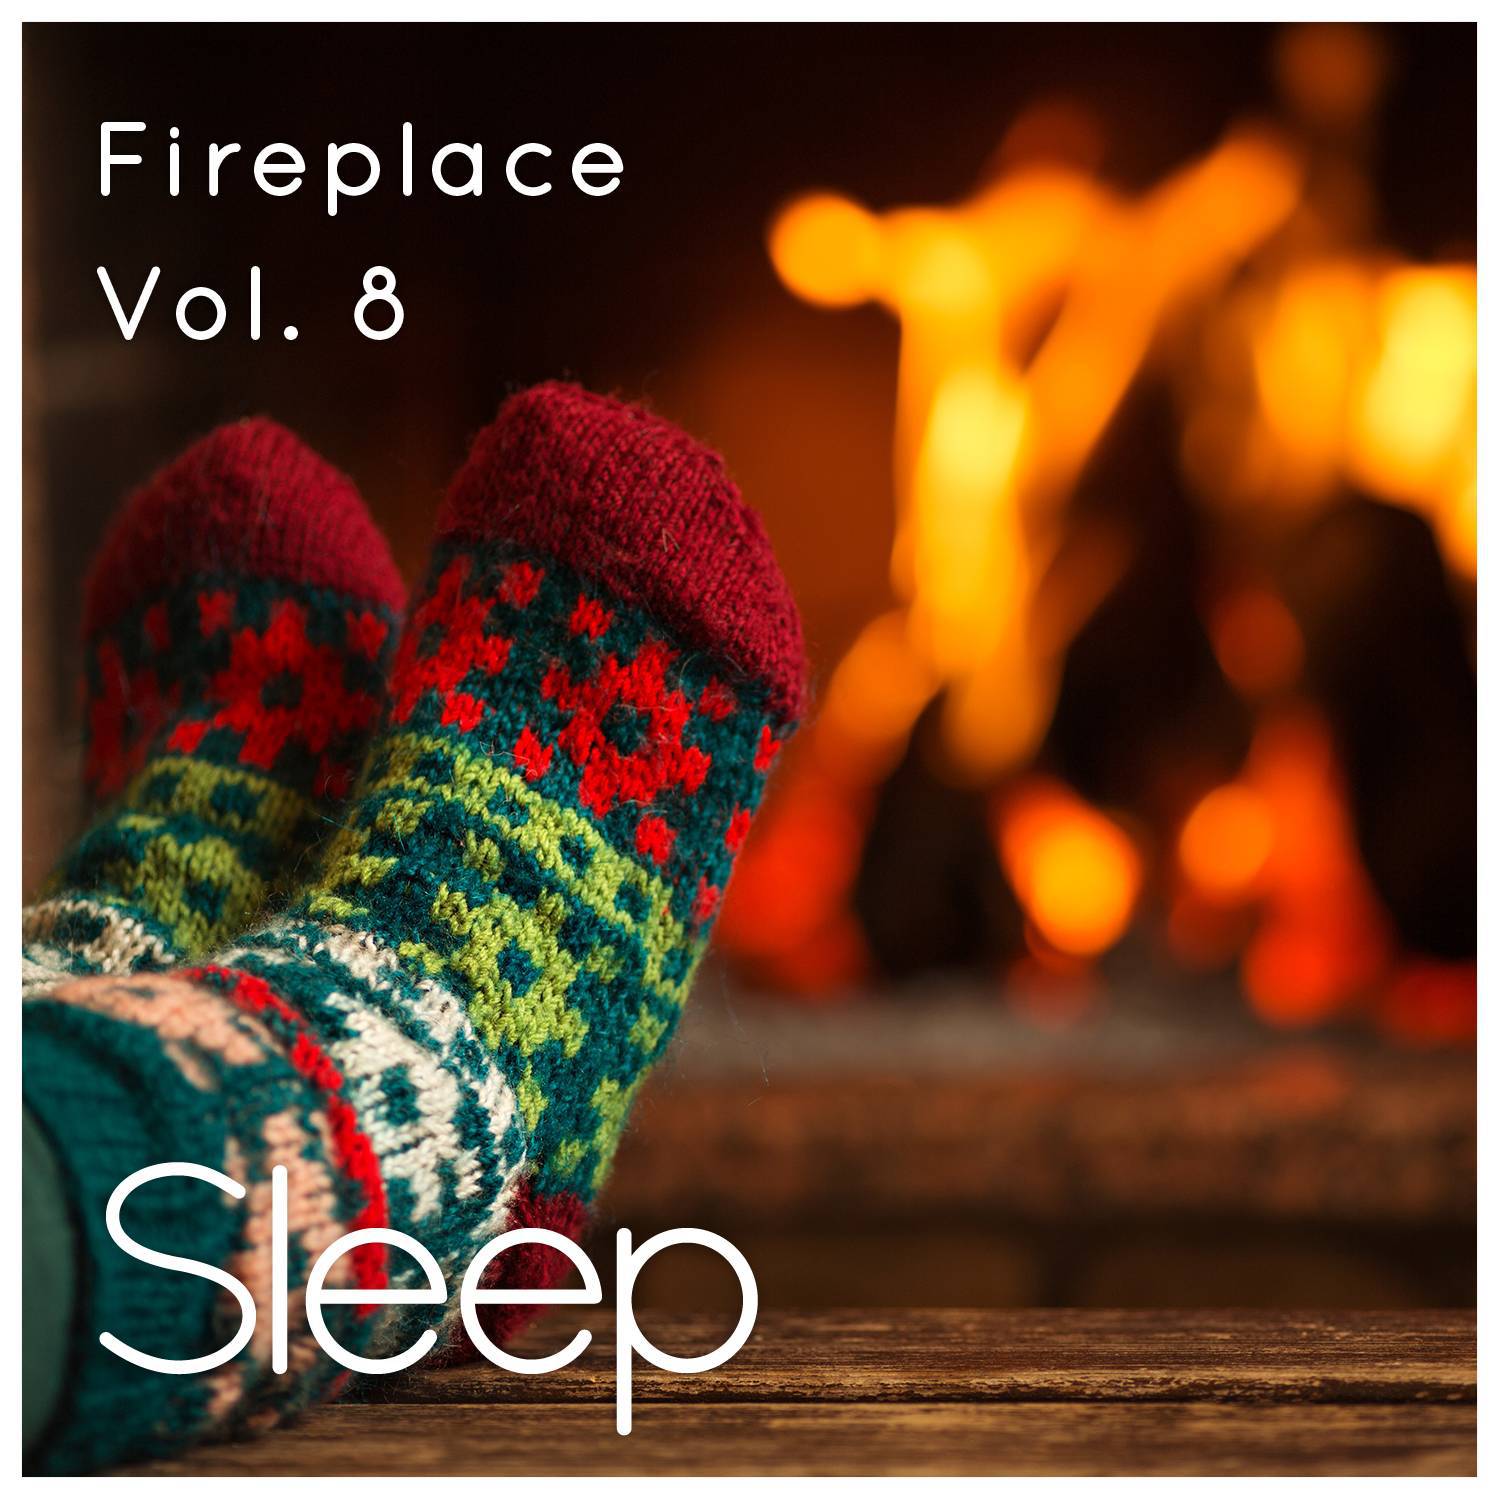 Sleep by Fireplace in Cabin, Vol. 8专辑